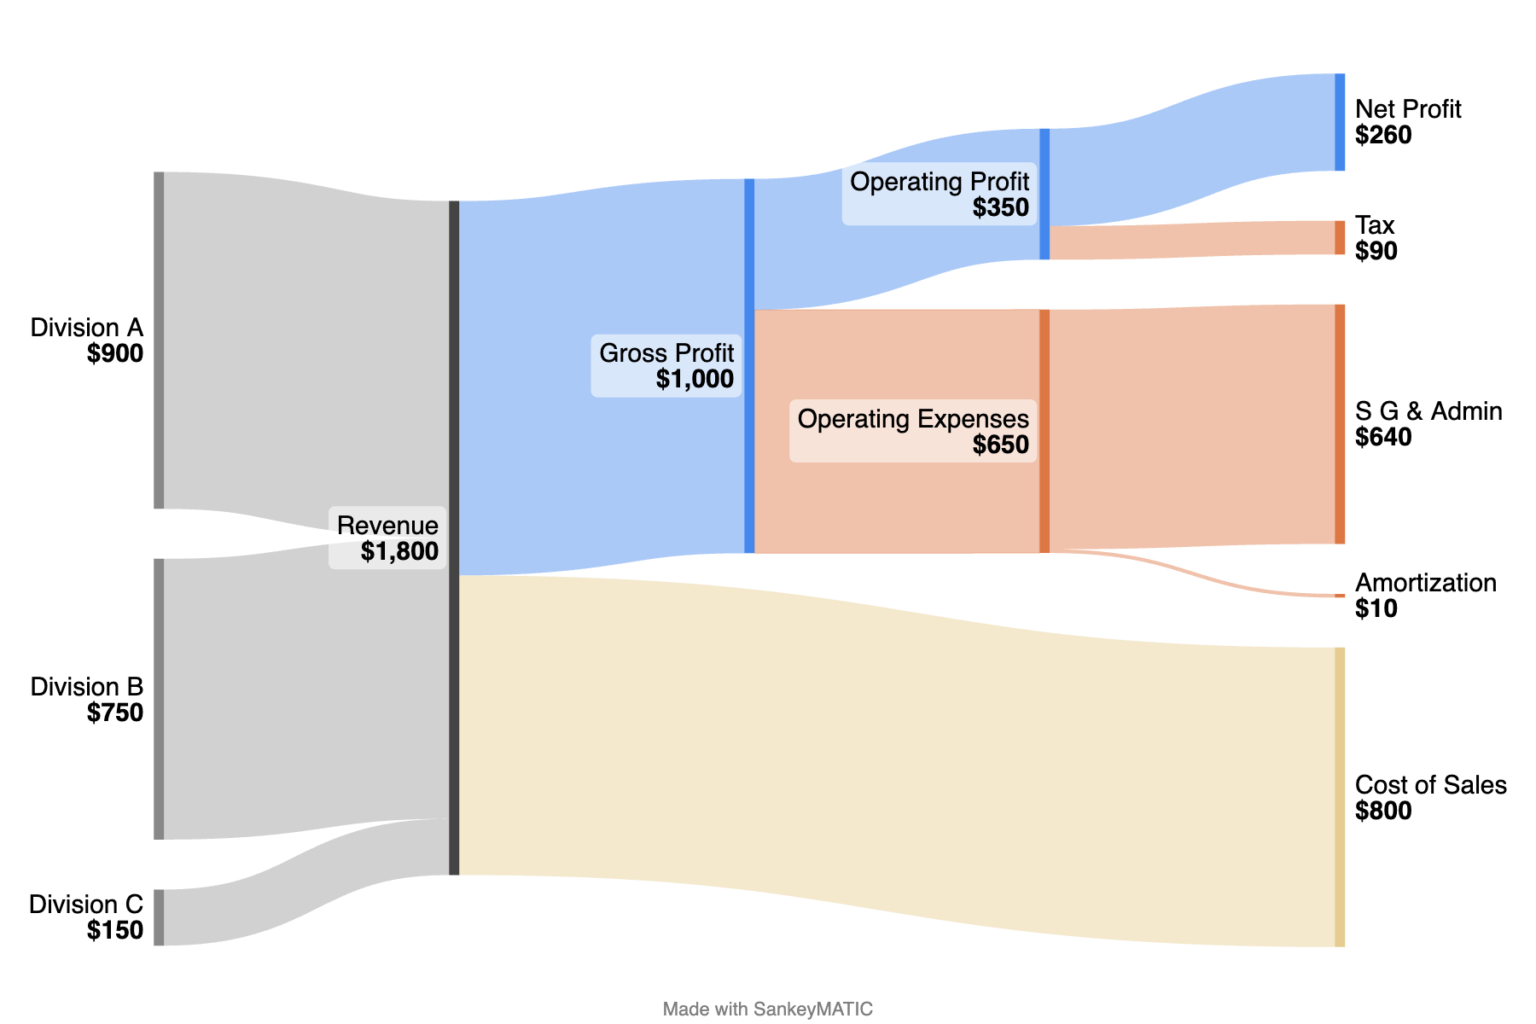 Example sankey diagram describing Financial Results for a company using mock data.

The label style used in this image is new – the name for each node is shown on one line using normal text, and the value of each node is shown on a second line using bold text.

In the diagram, 3 company divisions (A, B, and C) join their revenue amounts into a single "Revenue" node with a value of ,800, which is then split into Gross Profit (,000) and Cost of Sales (0).

The Gross Profit amount is further broken down into smaller components representing Expenses of various kinds until a remaining Net Profit of 0 is shown.